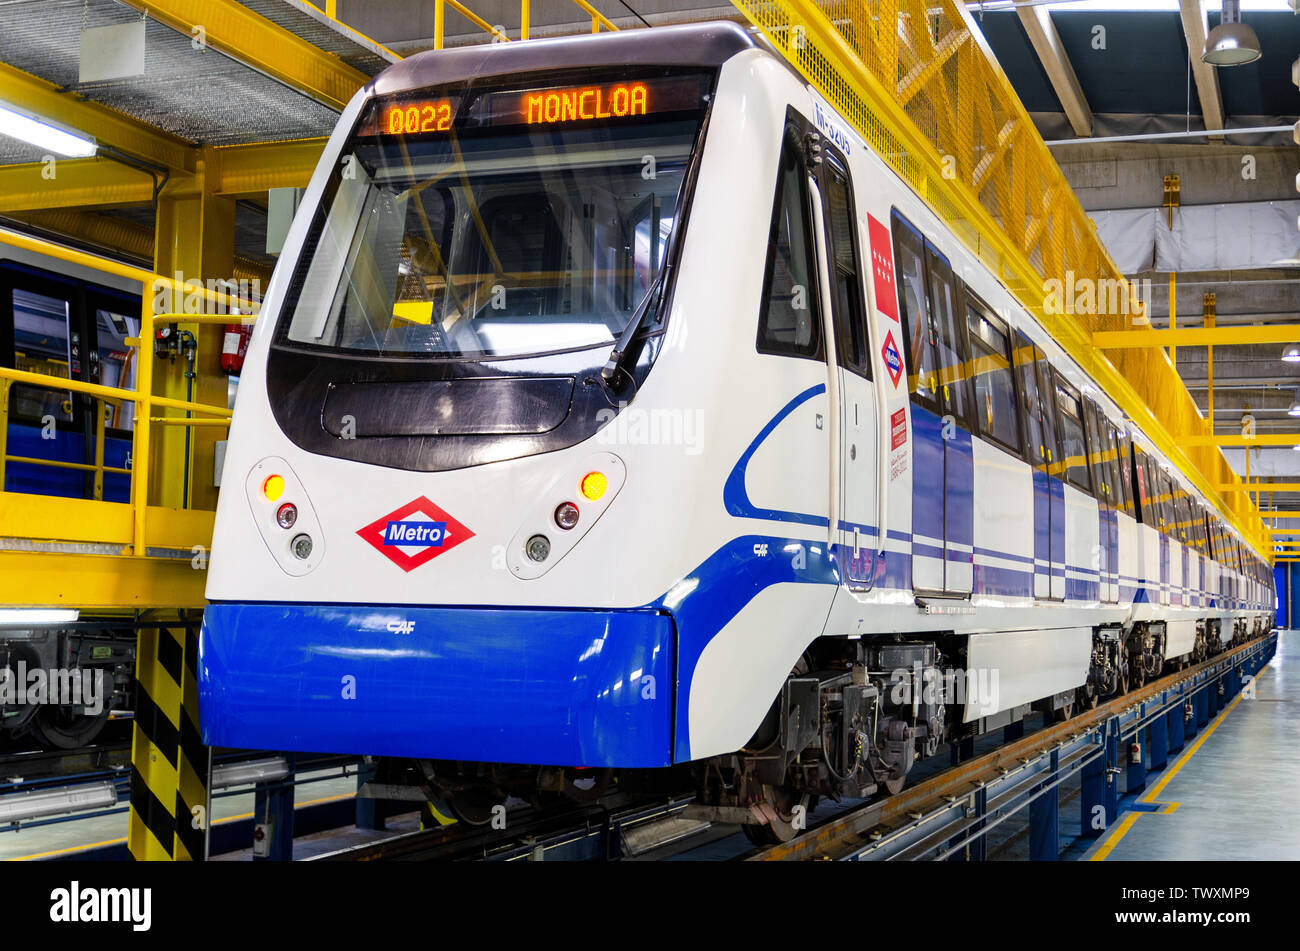 Madrid, Spain - December 25, 2012: The repair depot for trains Metro de Madrid underground railway system. Area of service and repair of wagons and trains .  Stock Photo